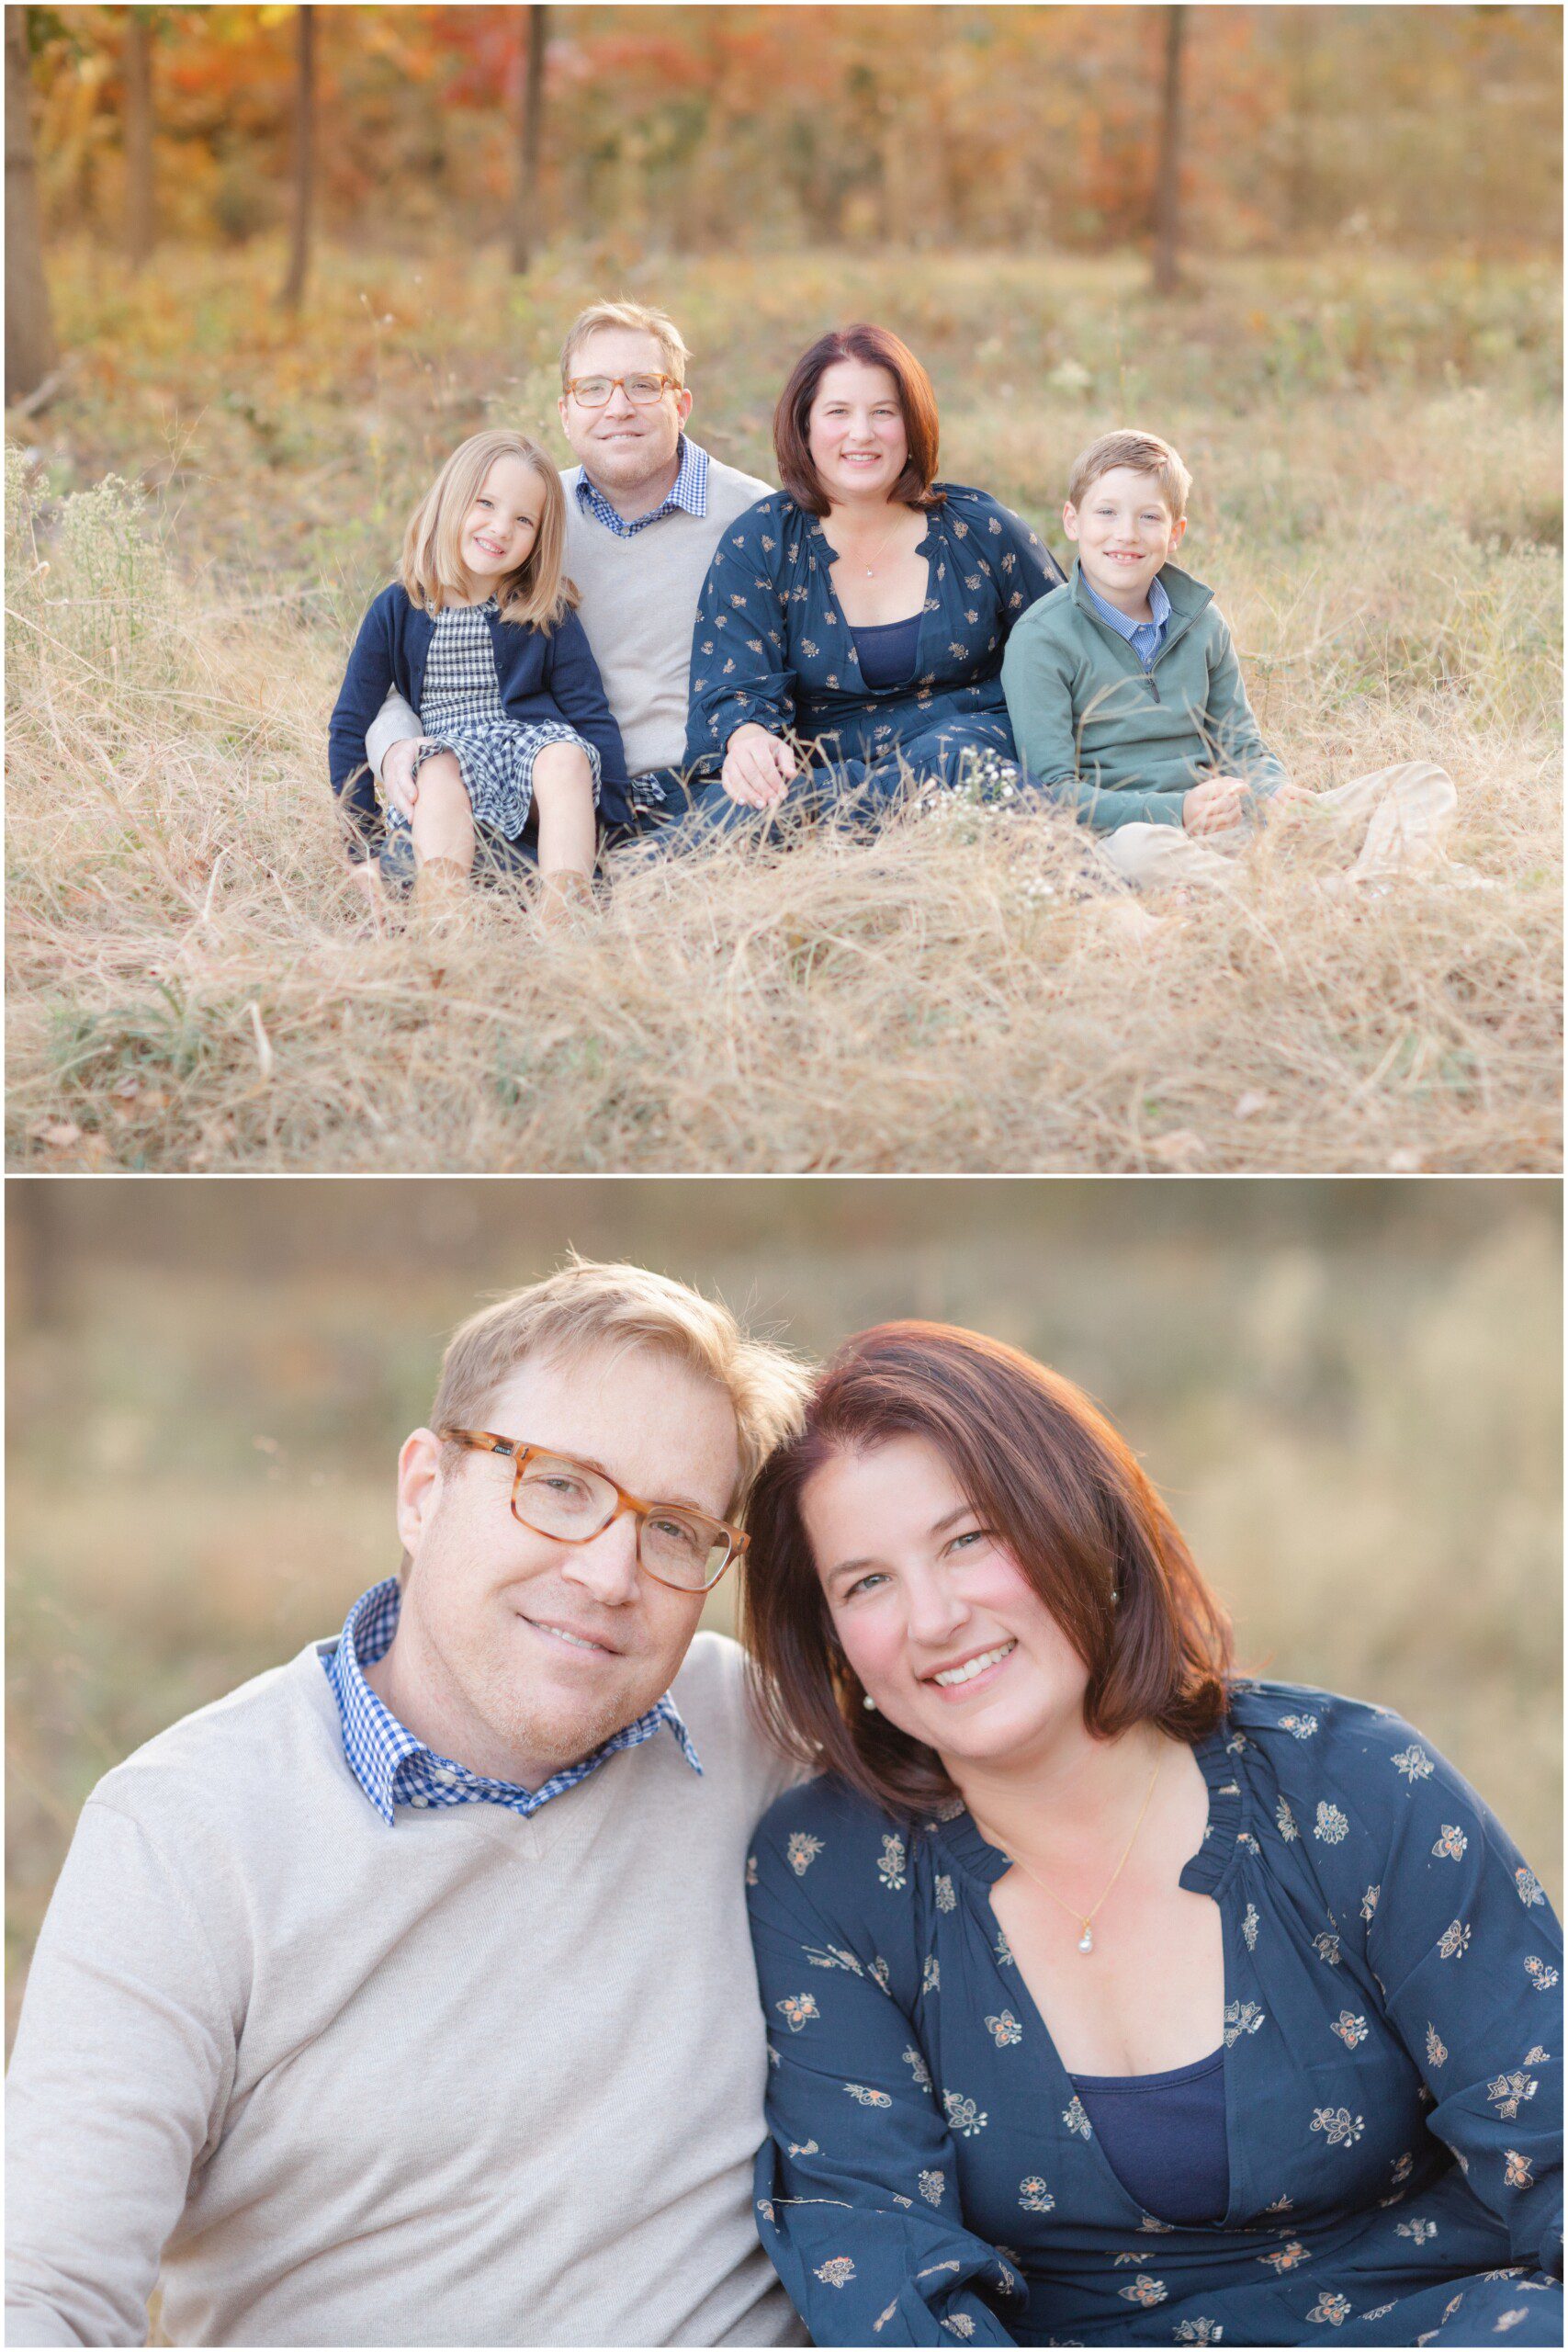 Beautiful Autumn family pictures in St. Louis